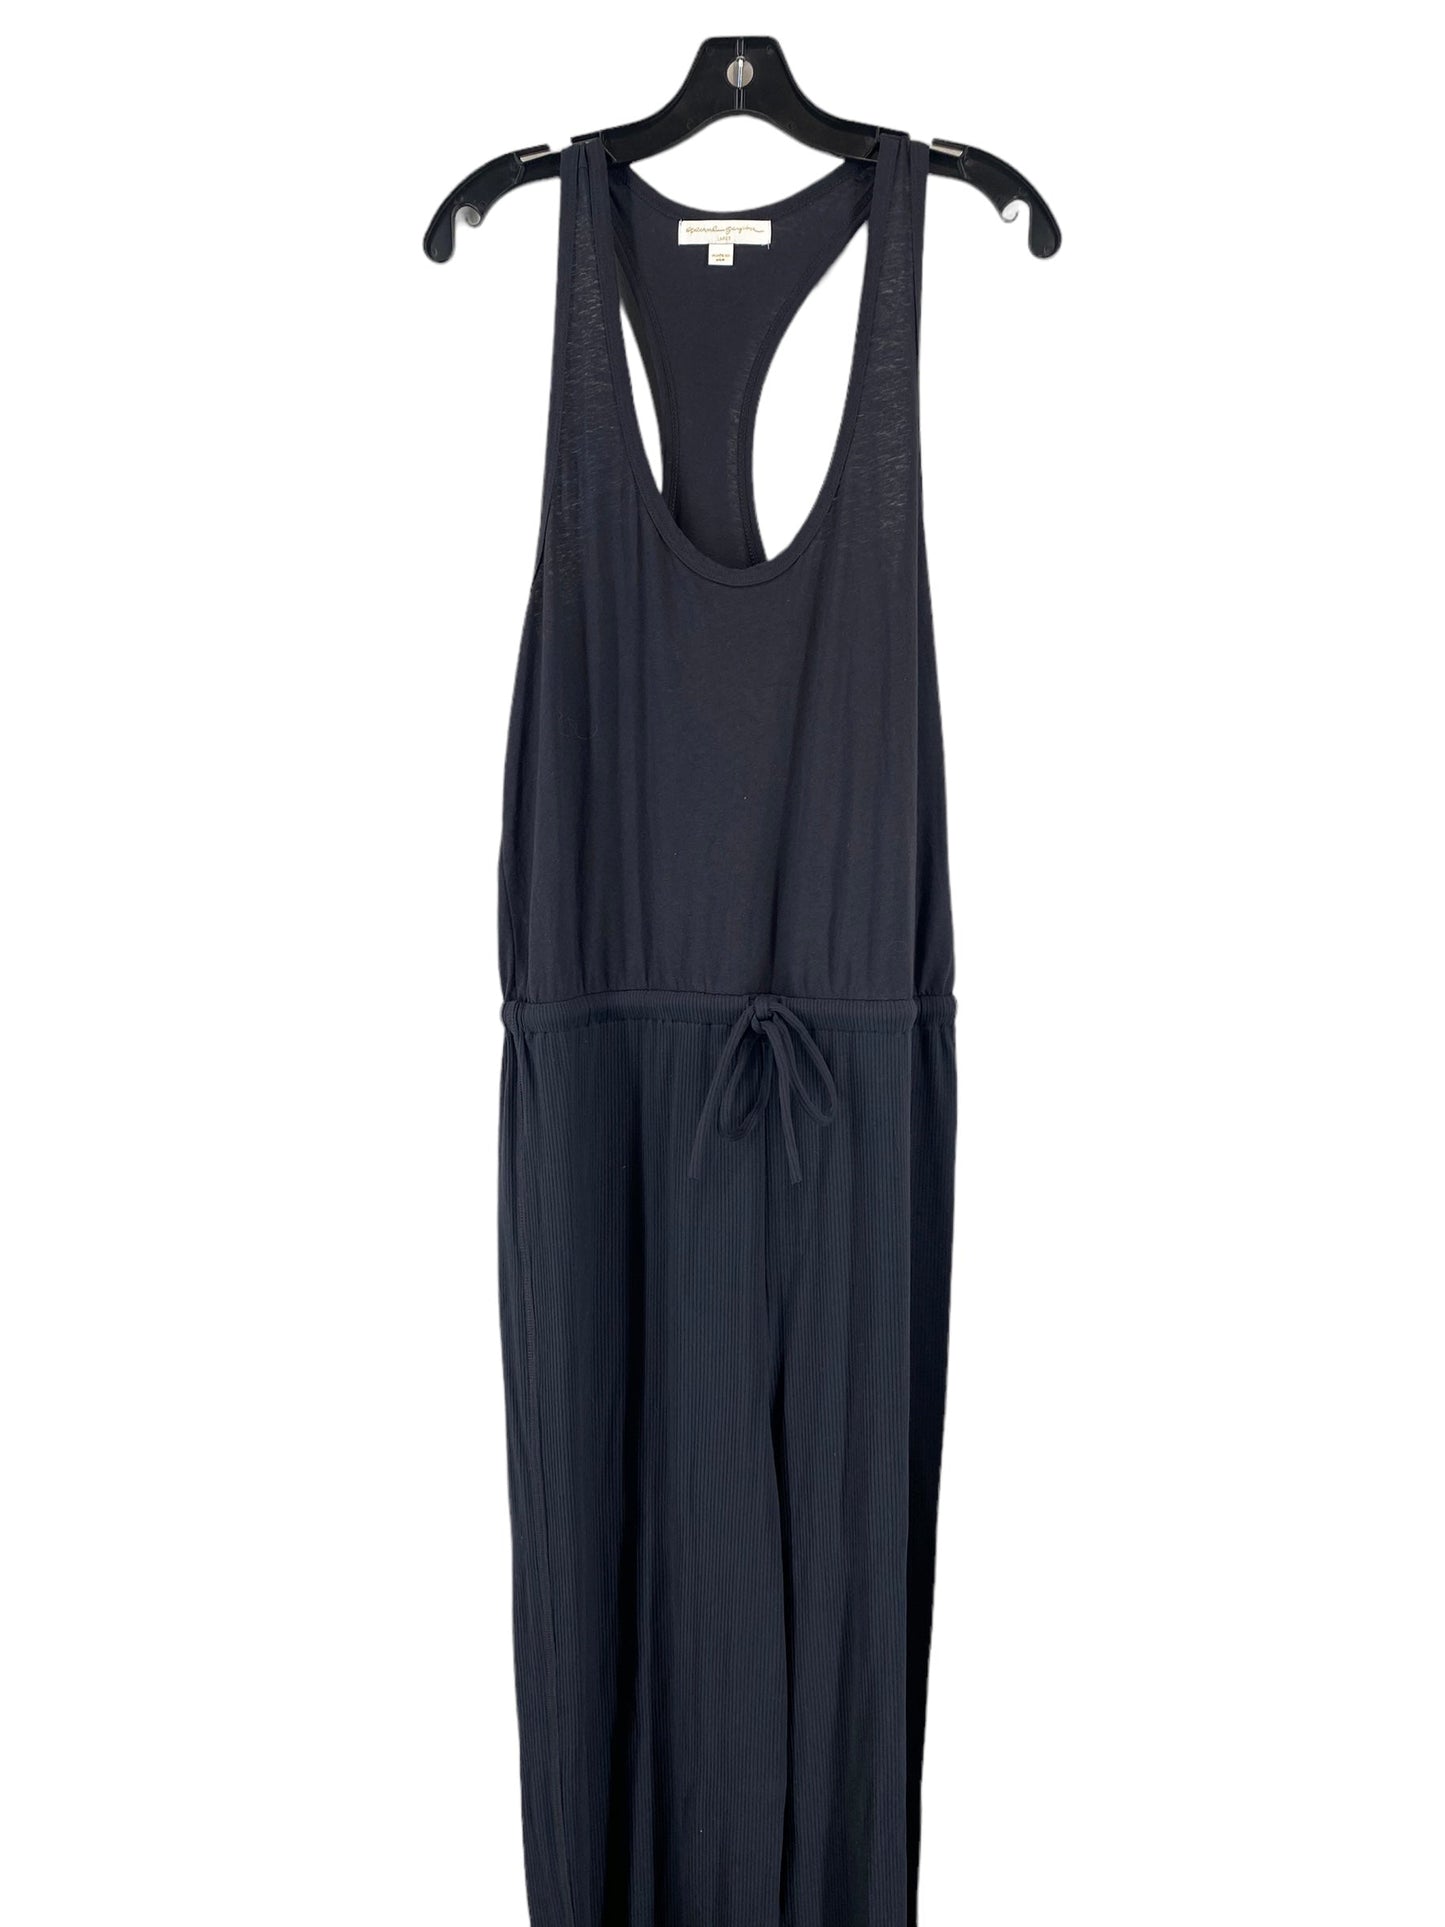 Jumpsuit By Spiritual Gangster  Size: L